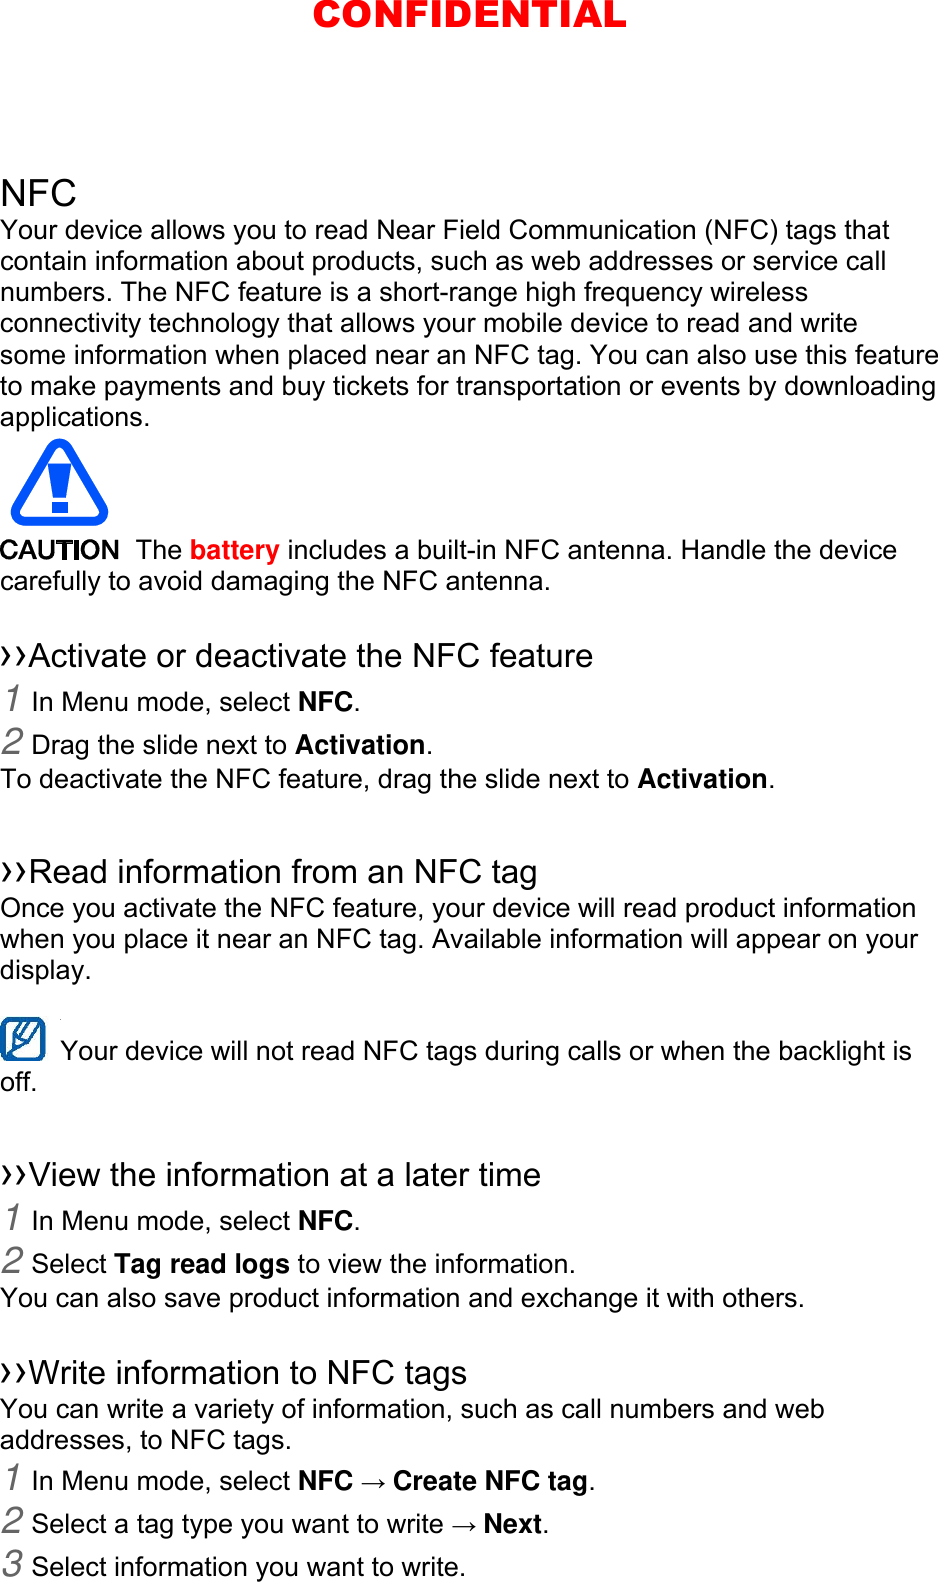 NFC Your device allows you to read Near Field Communication (NFC) tags that contain information about products, such as web addresses or service call numbers. The NFC feature is a short-range high frequency wireless connectivity technology that allows your mobile device to read and write some information when placed near an NFC tag. You can also use this feature to make payments and buy tickets for transportation or events by downloading applications.   The battery includes a built-in NFC antenna. Handle the device carefully to avoid damaging the NFC antenna.  ››Activate or deactivate the NFC feature 1 In Menu mode, select NFC. 2 Drag the slide next to Activation. To deactivate the NFC feature, drag the slide next to Activation.  ››Read information from an NFC tag Once you activate the NFC feature, your device will read product information when you place it near an NFC tag. Available information will appear on your display.  Your device will not read NFC tags during calls or when the backlight is   off.  ››View the information at a later time 1 In Menu mode, select NFC. 2 Select Tag read logs to view the information. You can also save product information and exchange it with others.  ››Write information to NFC tags   You can write a variety of information, such as call numbers and web addresses, to NFC tags. 1 In Menu mode, select NFC → Create NFC tag. 2 Select a tag type you want to write → Next. 3 Select information you want to write. CONFIDENTIAL